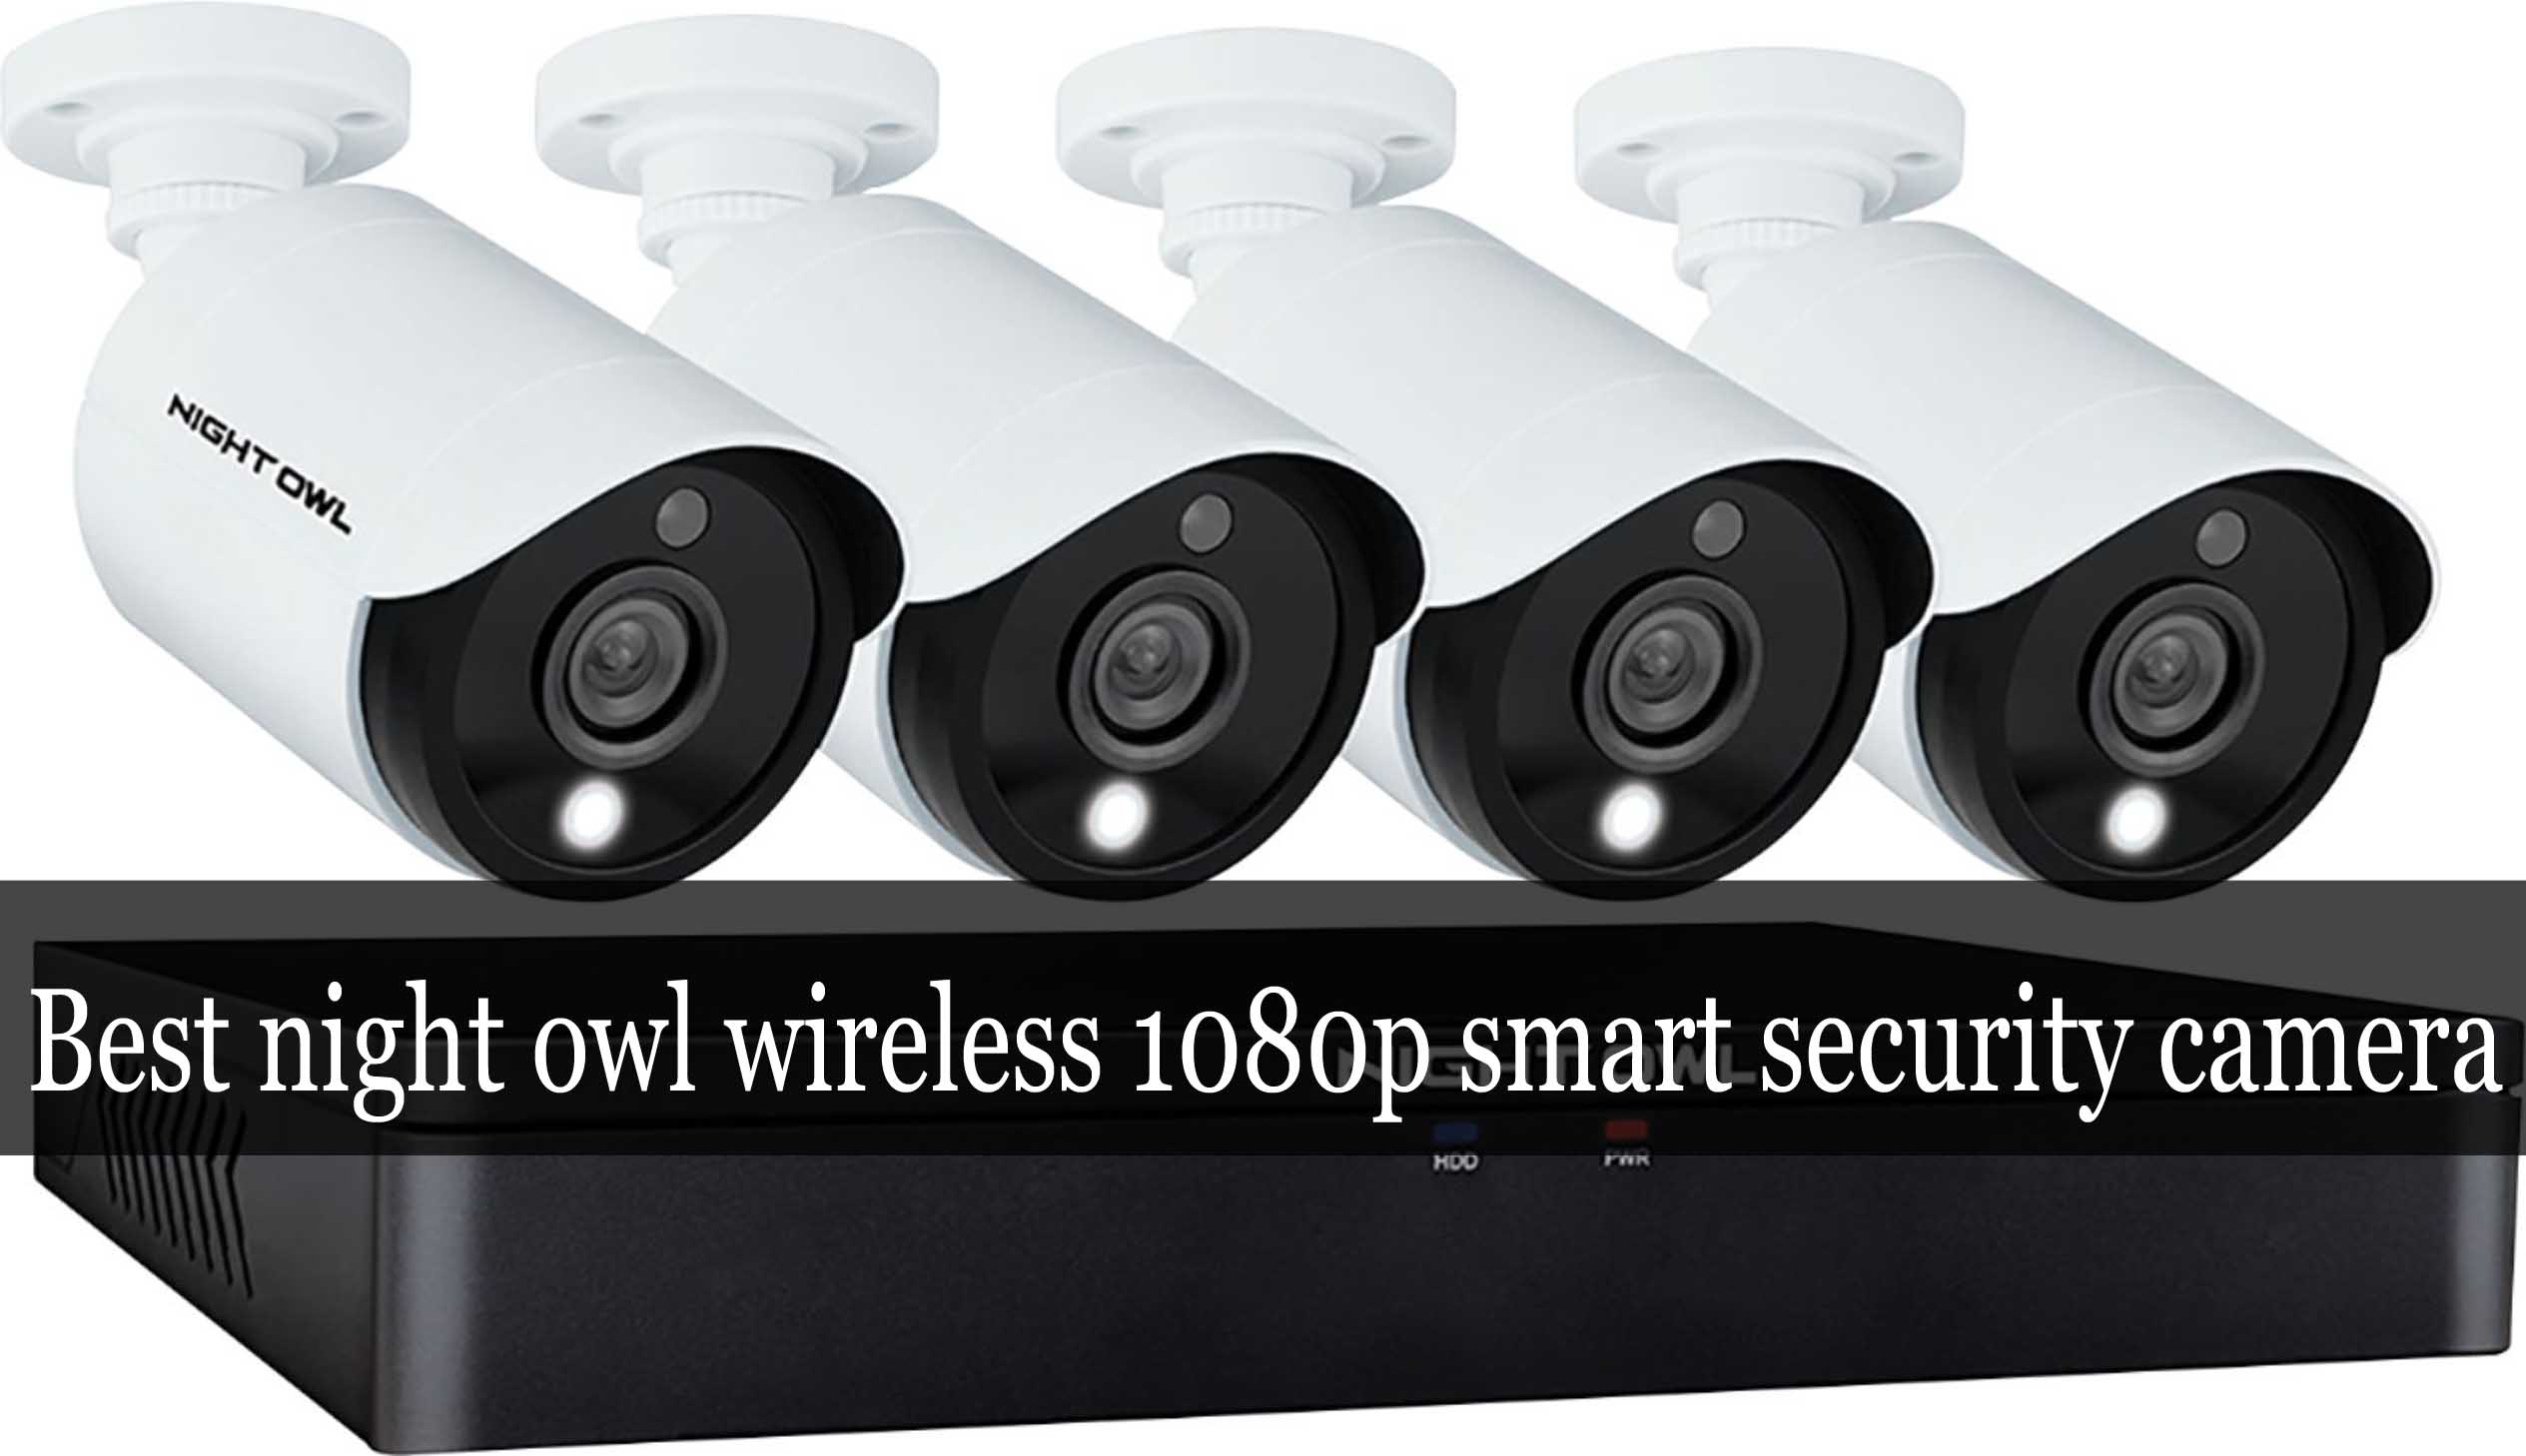 night owl security system video loss